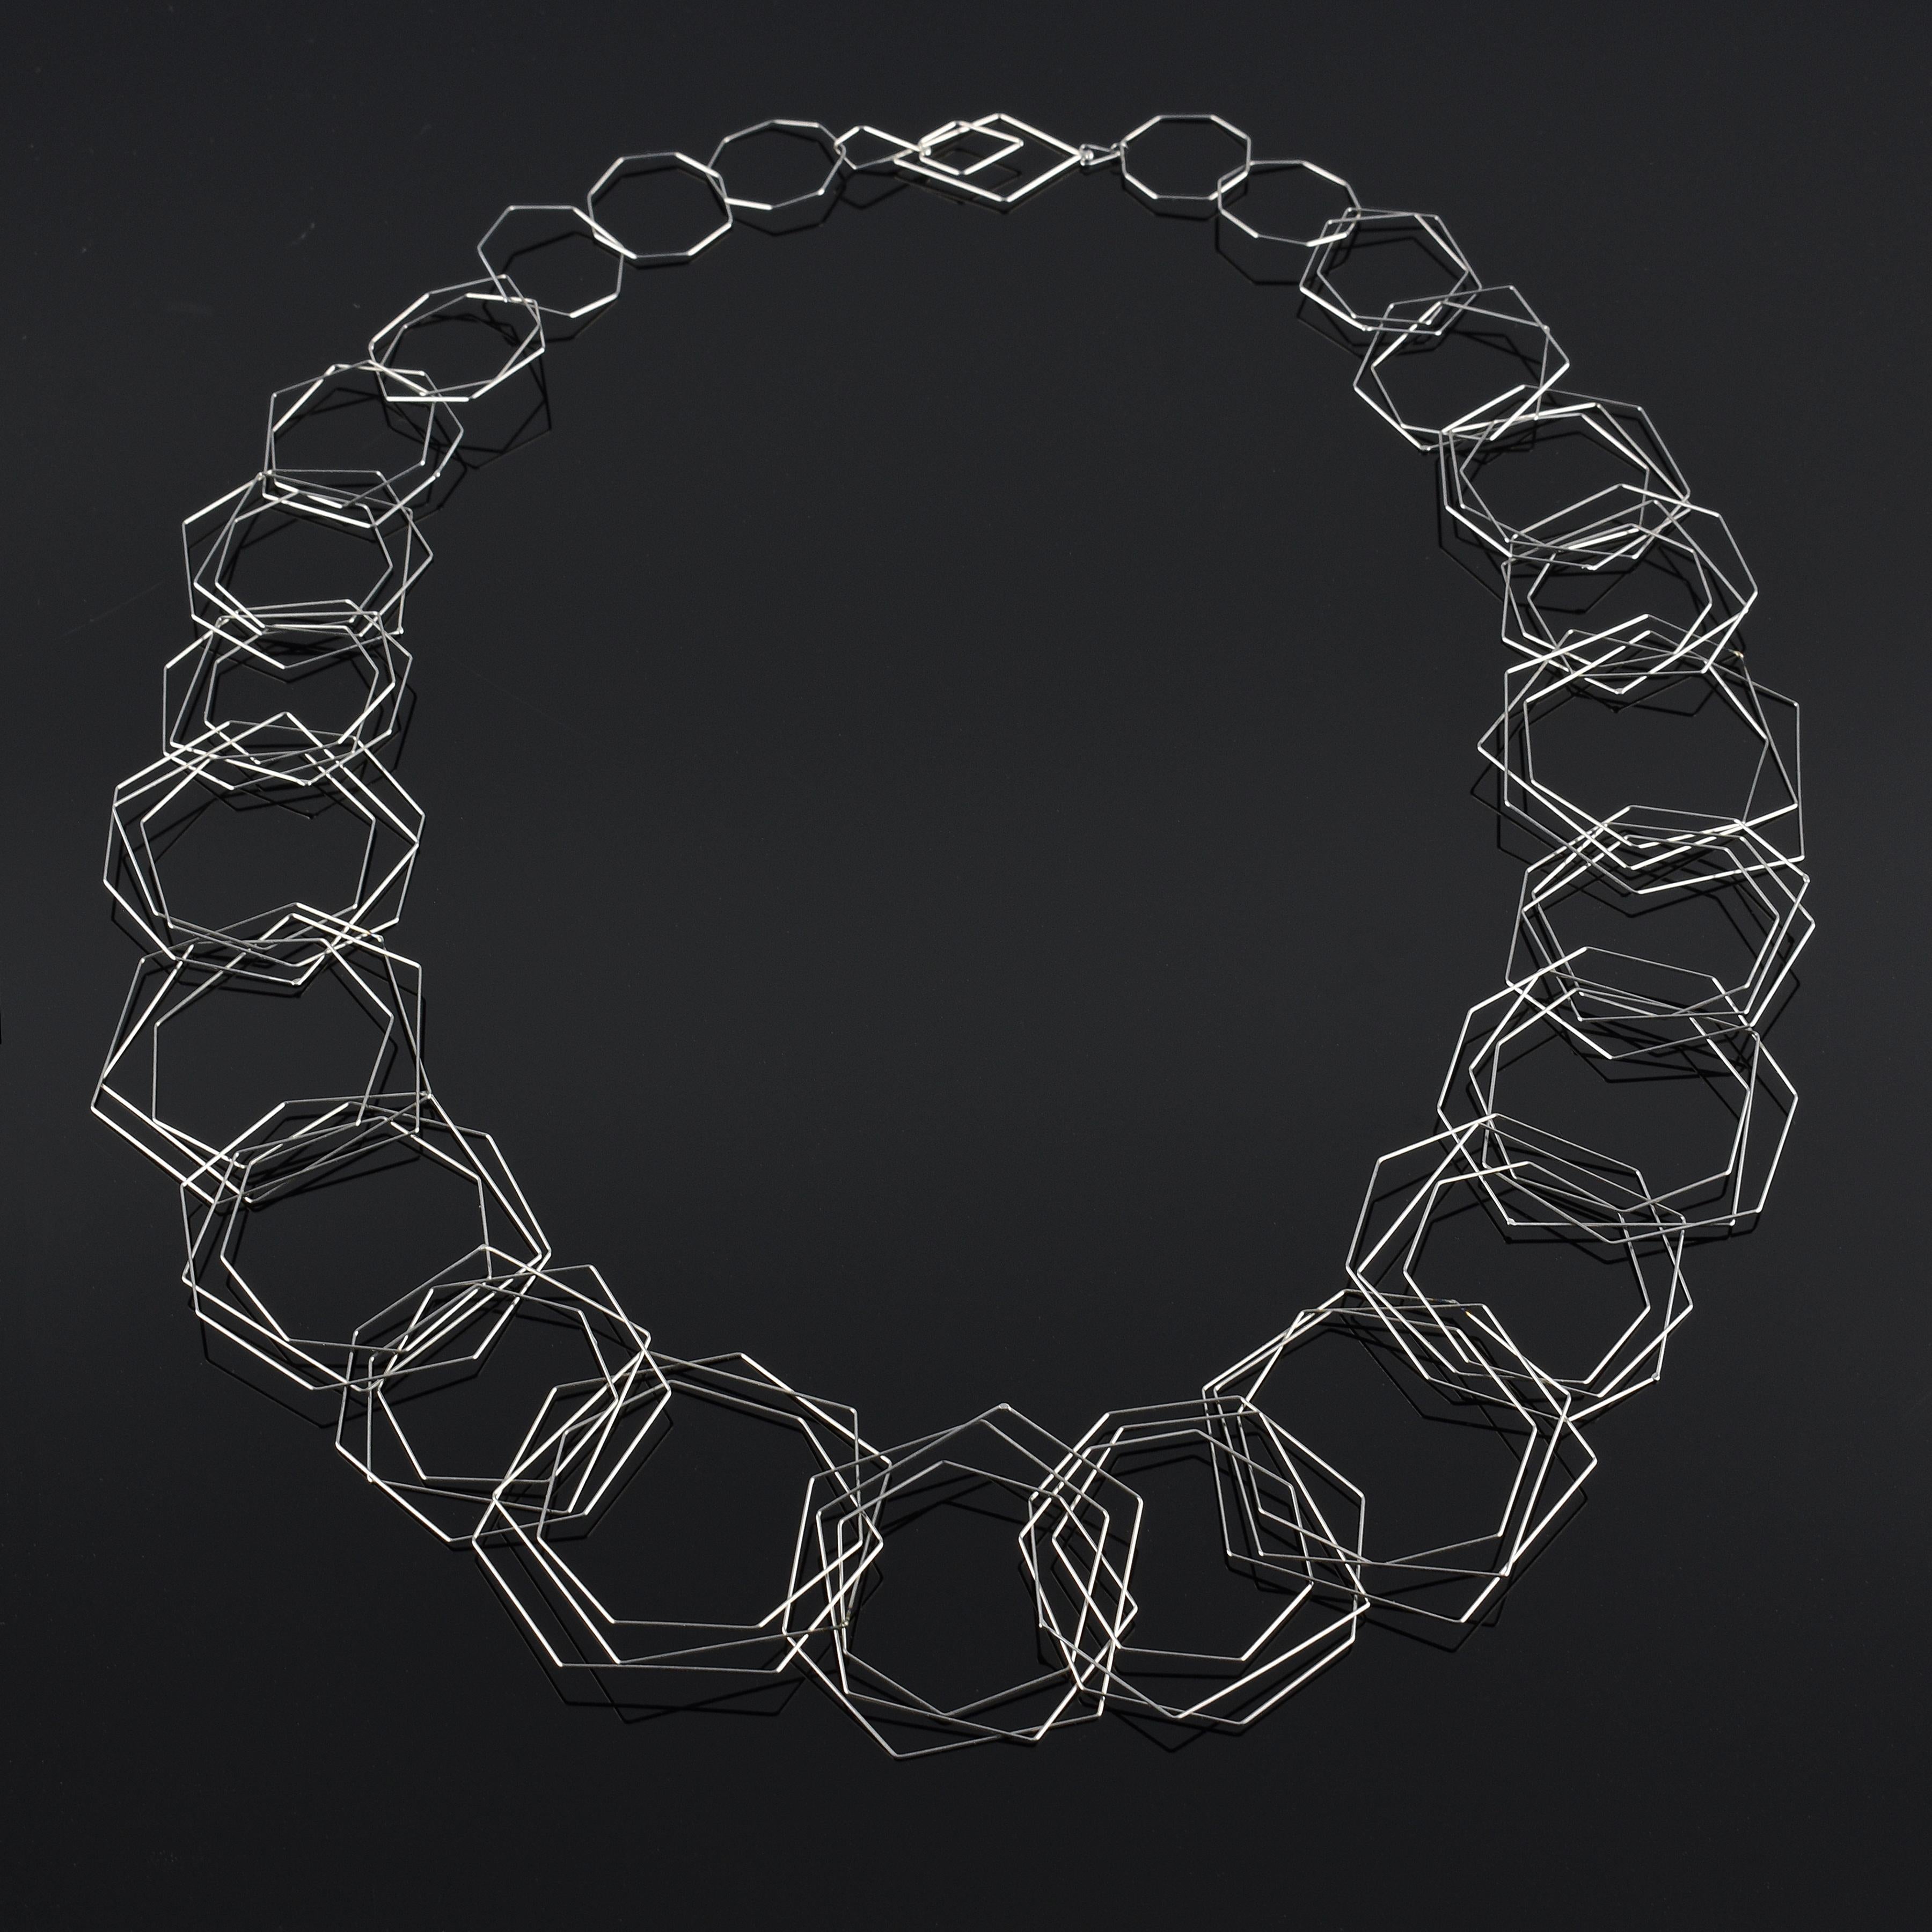 "Tenitic Necklace  Long " a contemporary, fine gauge stainless steel necklace